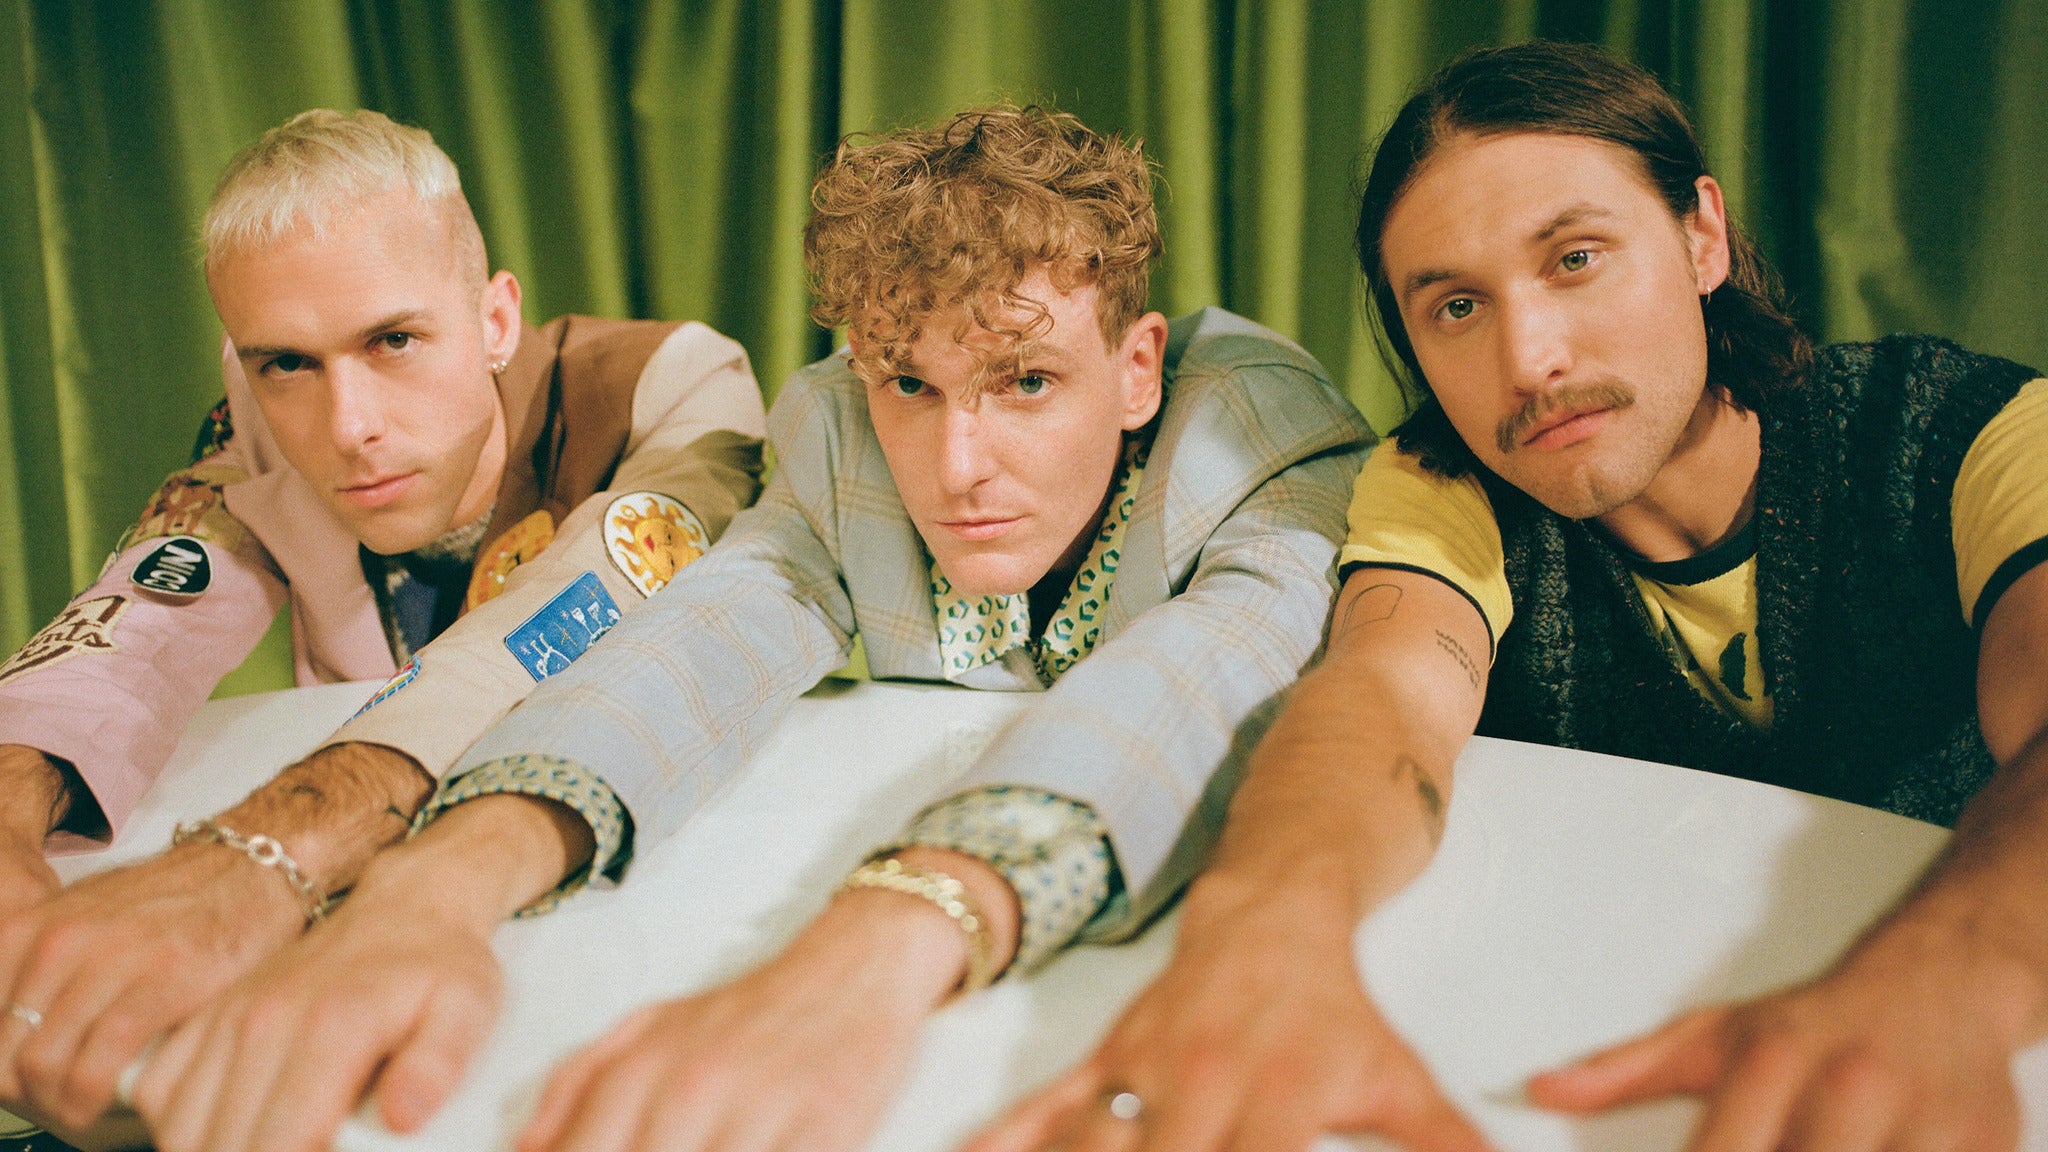 COIN: Rainbow Dreamland Tour in Baltimore promo photo for Live Nation presale offer code